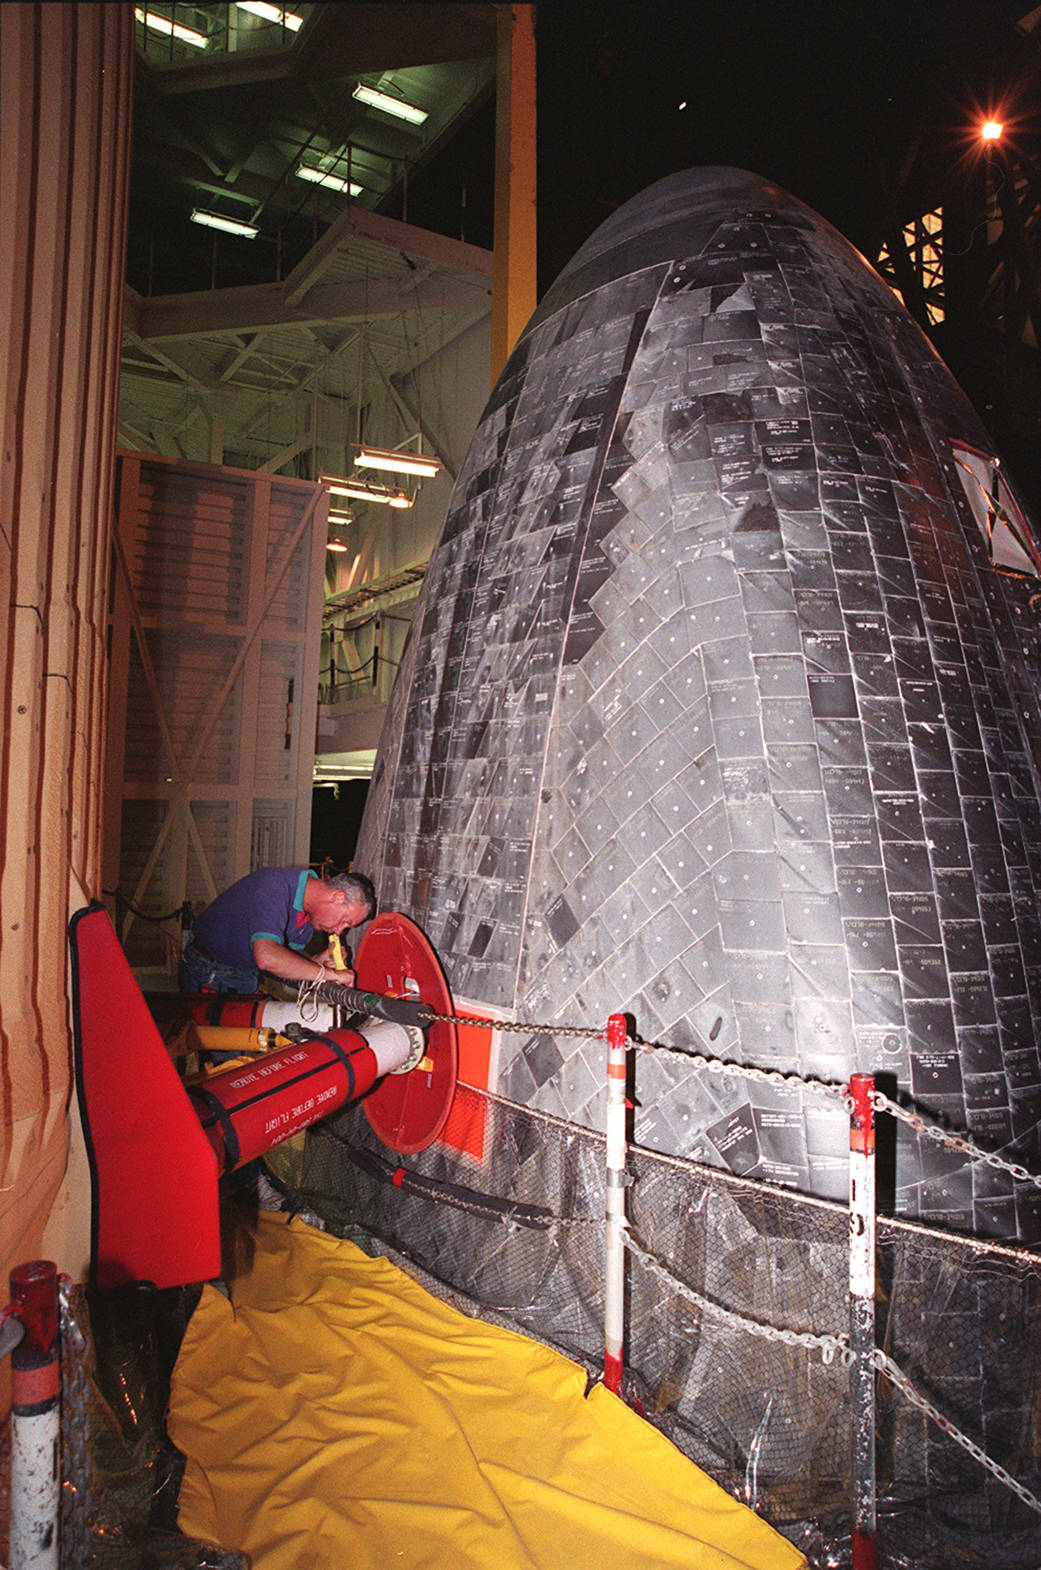 View of black tile covered bottom of shuttle Discovery with technician working at left